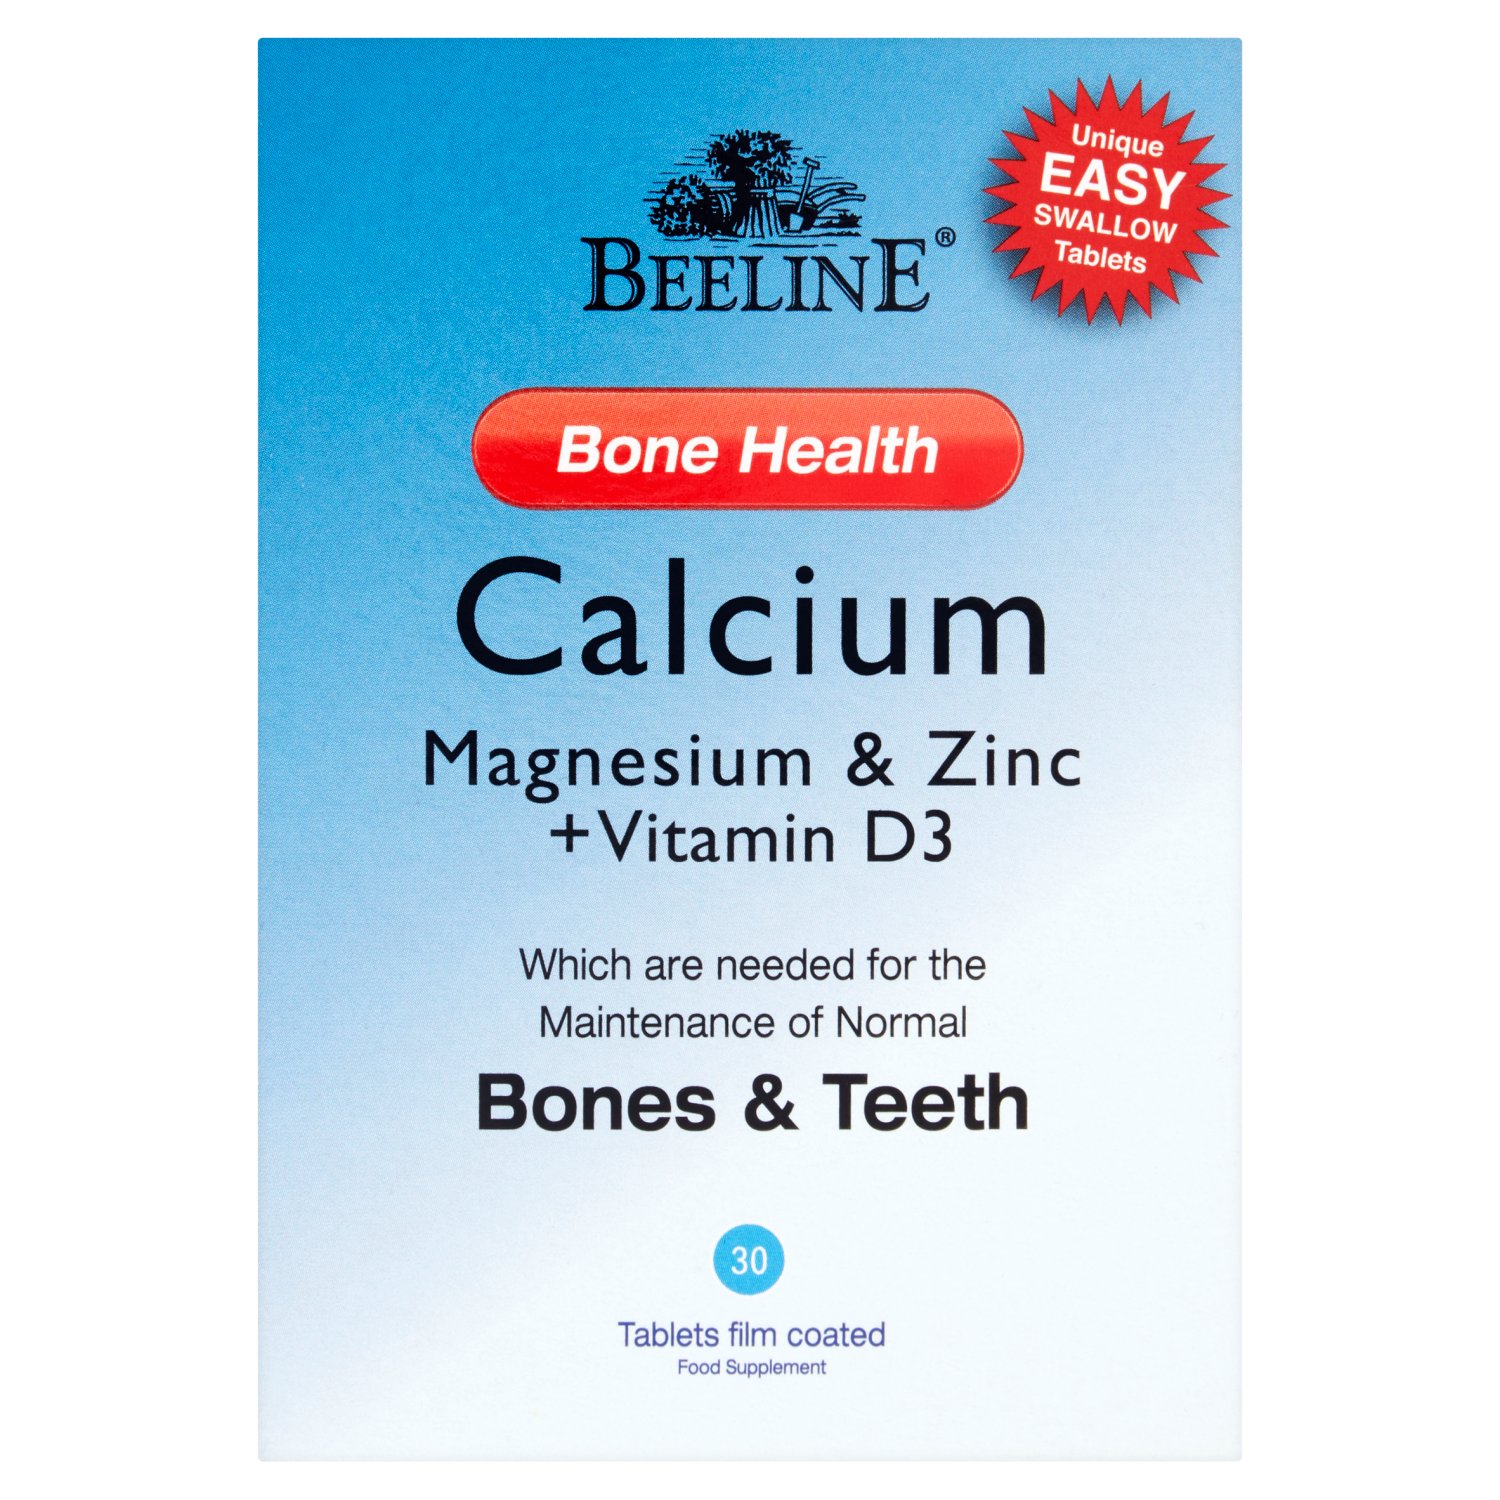 The formula provides
More Magnesium than 4 pints of milk More Calcium than a whole pint of milk Vitamin D3 and 7 supporting nutrients for bones and joint health.

Beeline's unique Bone Health Formula provides the correct amount of the key nutrients to keep your bones strong and healthy, 100% NRV of Calcium, Magnesium, Zinc & Vitamin D3 together with 6 supporting organic marine minerals. Natural sourced concentrated mineral Calcium is used in this formula together with natural Organic Marine Minerals (Seacal). Seacal provides a unique source of minerals in a format readily available to the body (bioavailable).

Calcium, Magnesium & Vitamin D are all needed for the maintenance of normal bones and teeth.
Magnesium: contributes to a reduction of tiredness and fatigue and also contributes to normal muscle function.
Zinc: is needed for the maintenance of normal hair, nails & skin.
Vitamin D: is needed for the normal absorption/utilisation of Calcium. 